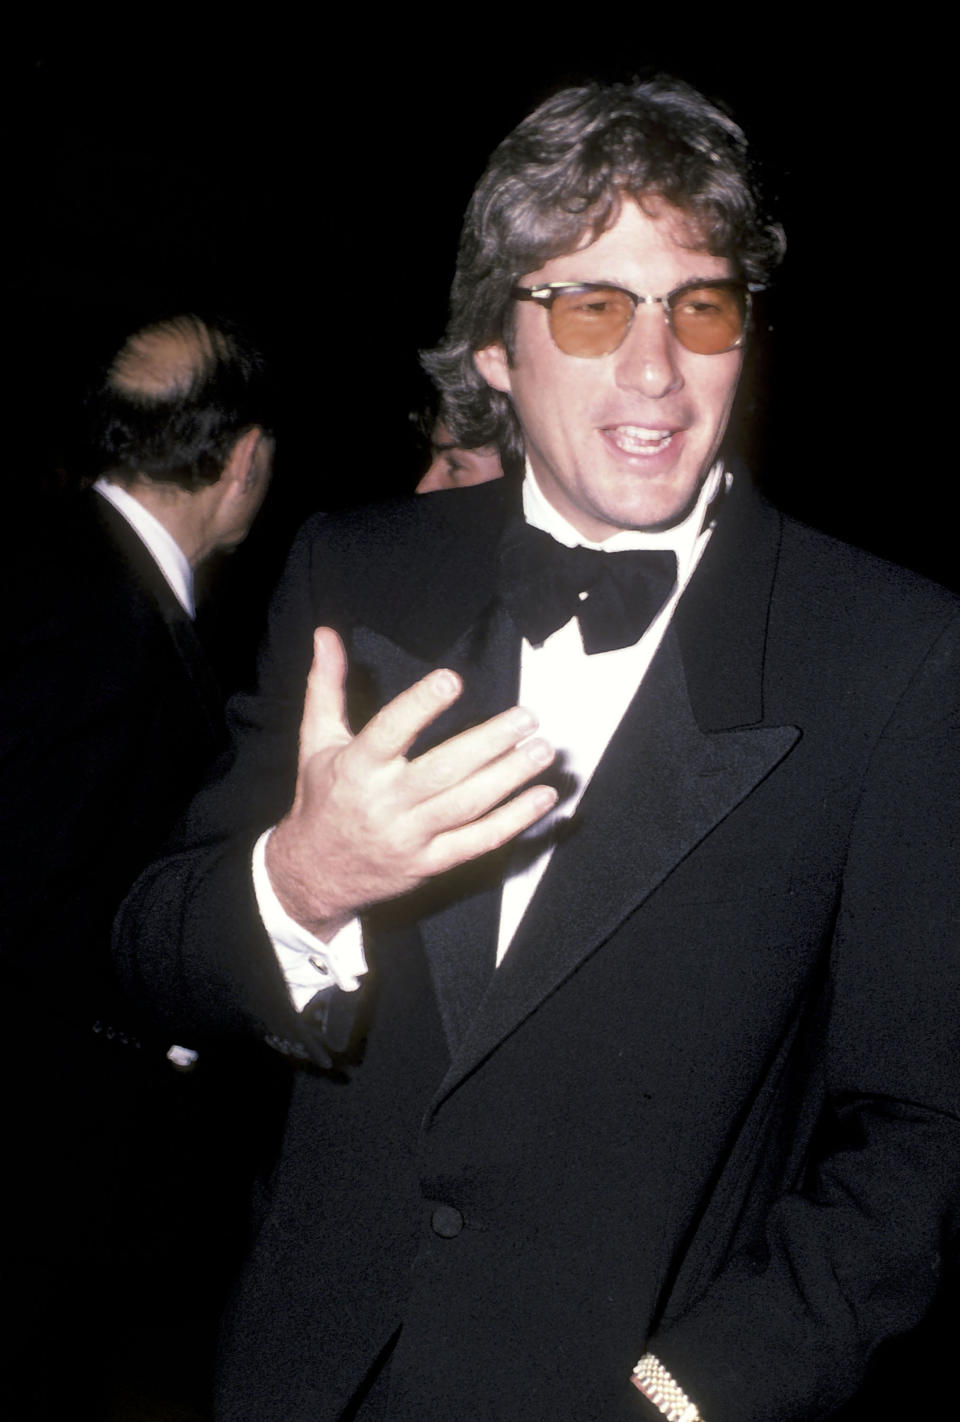 Close-up of Richard in a tux and sunglasses